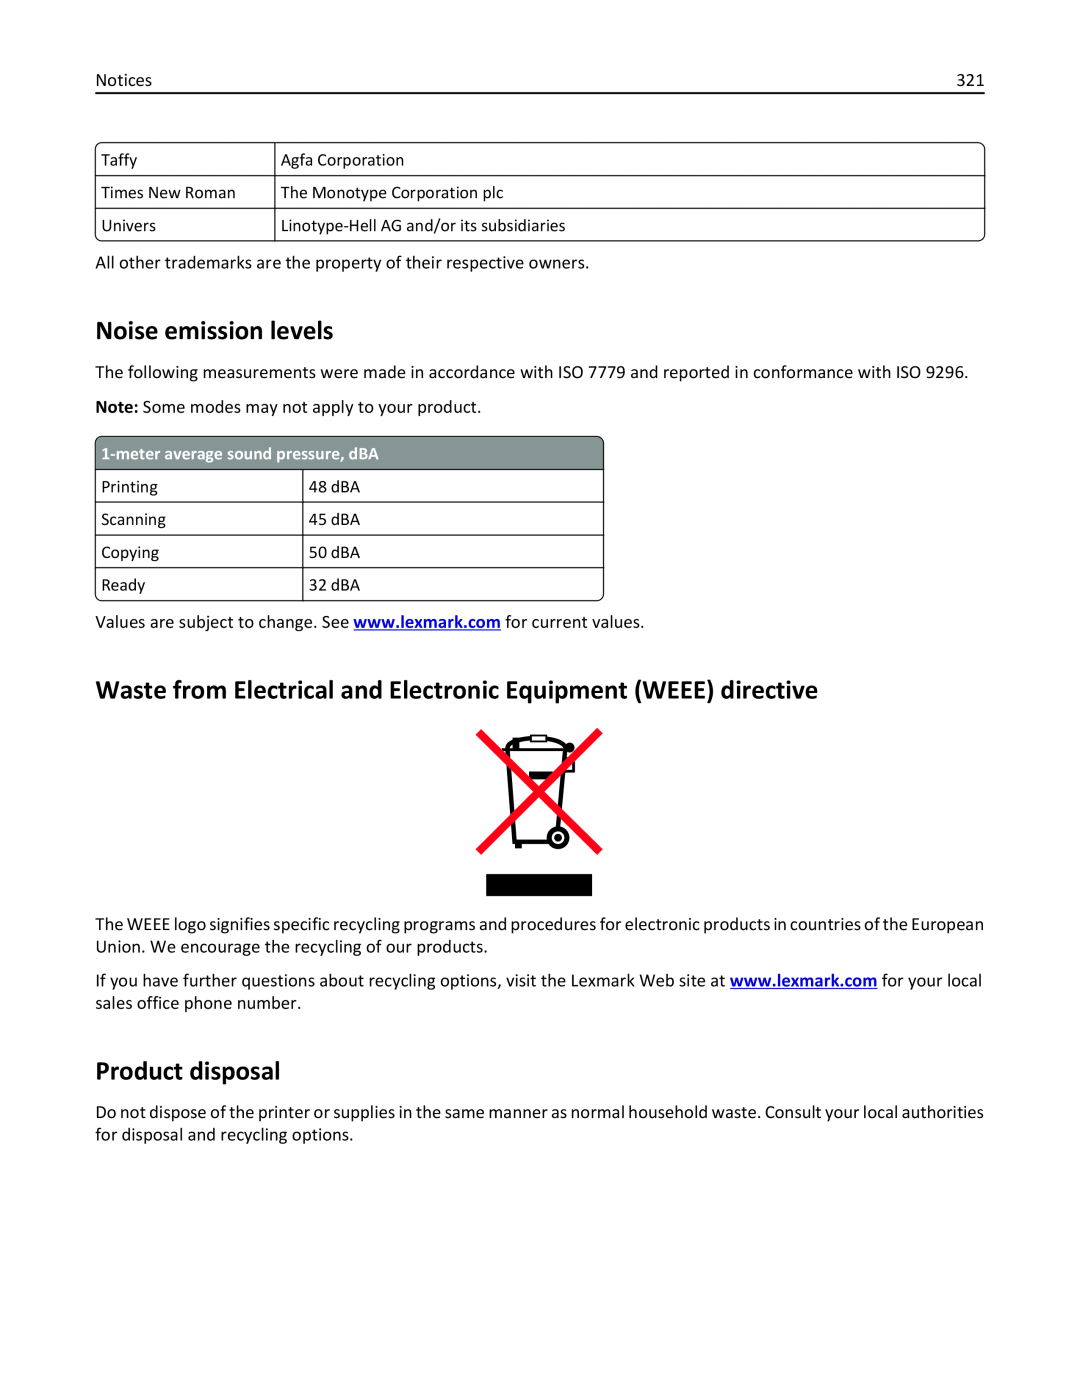 Lexmark 436 manual Noise emission levels, Waste from Electrical and Electronic Equipment WEEE directive, Product disposal 